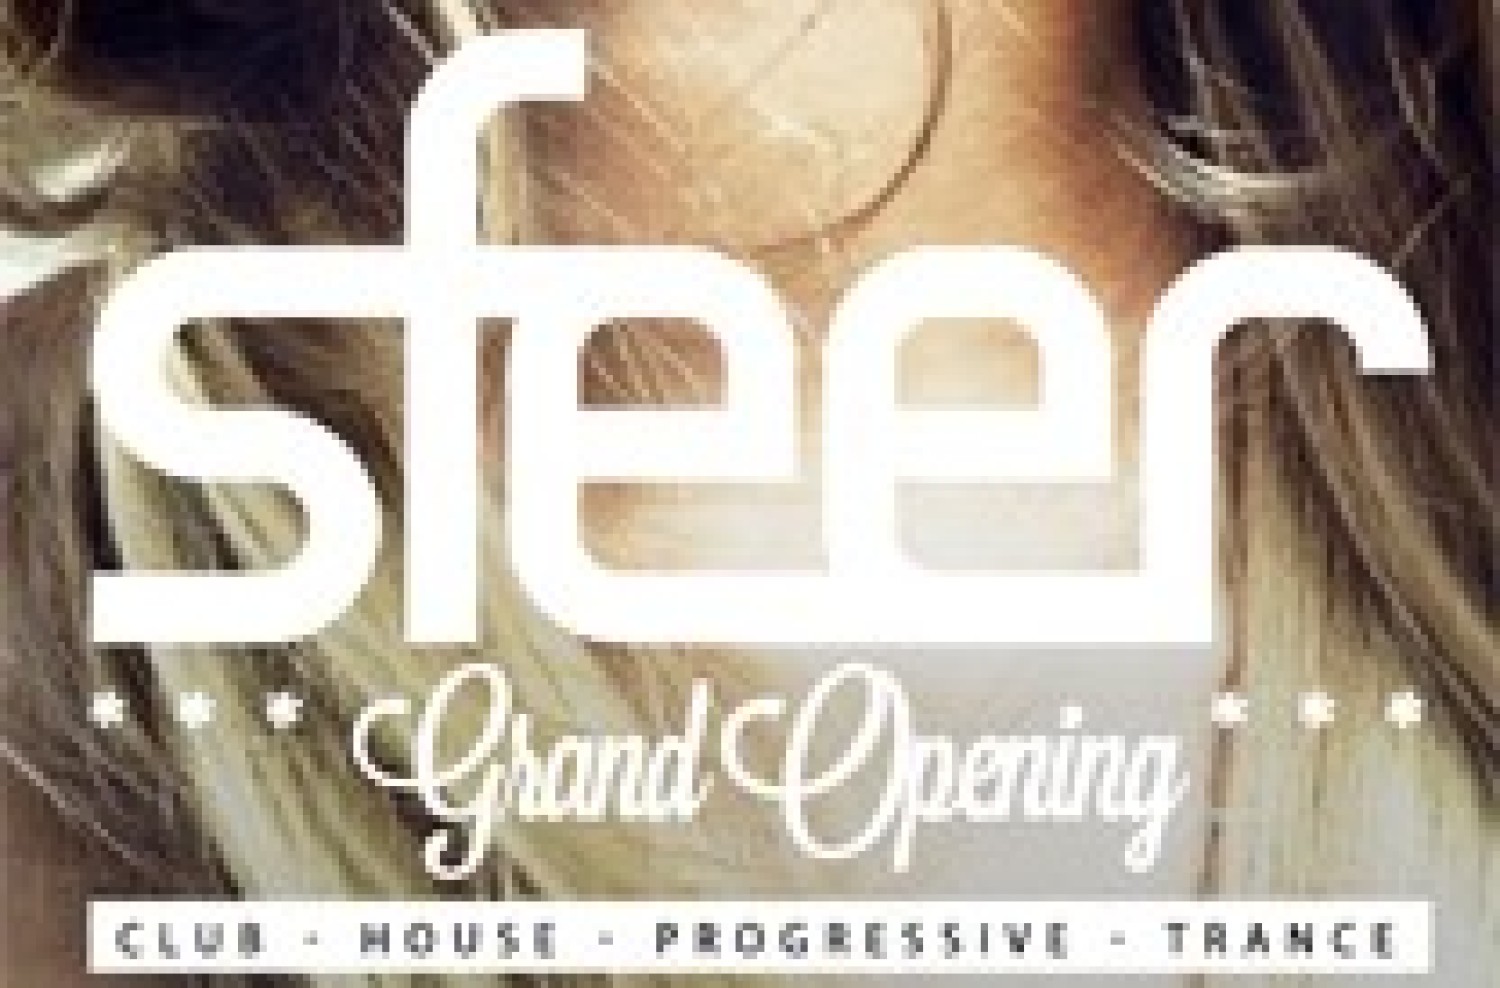 Party nieuws: SFEER - Grand Opening, de ideale afterparty